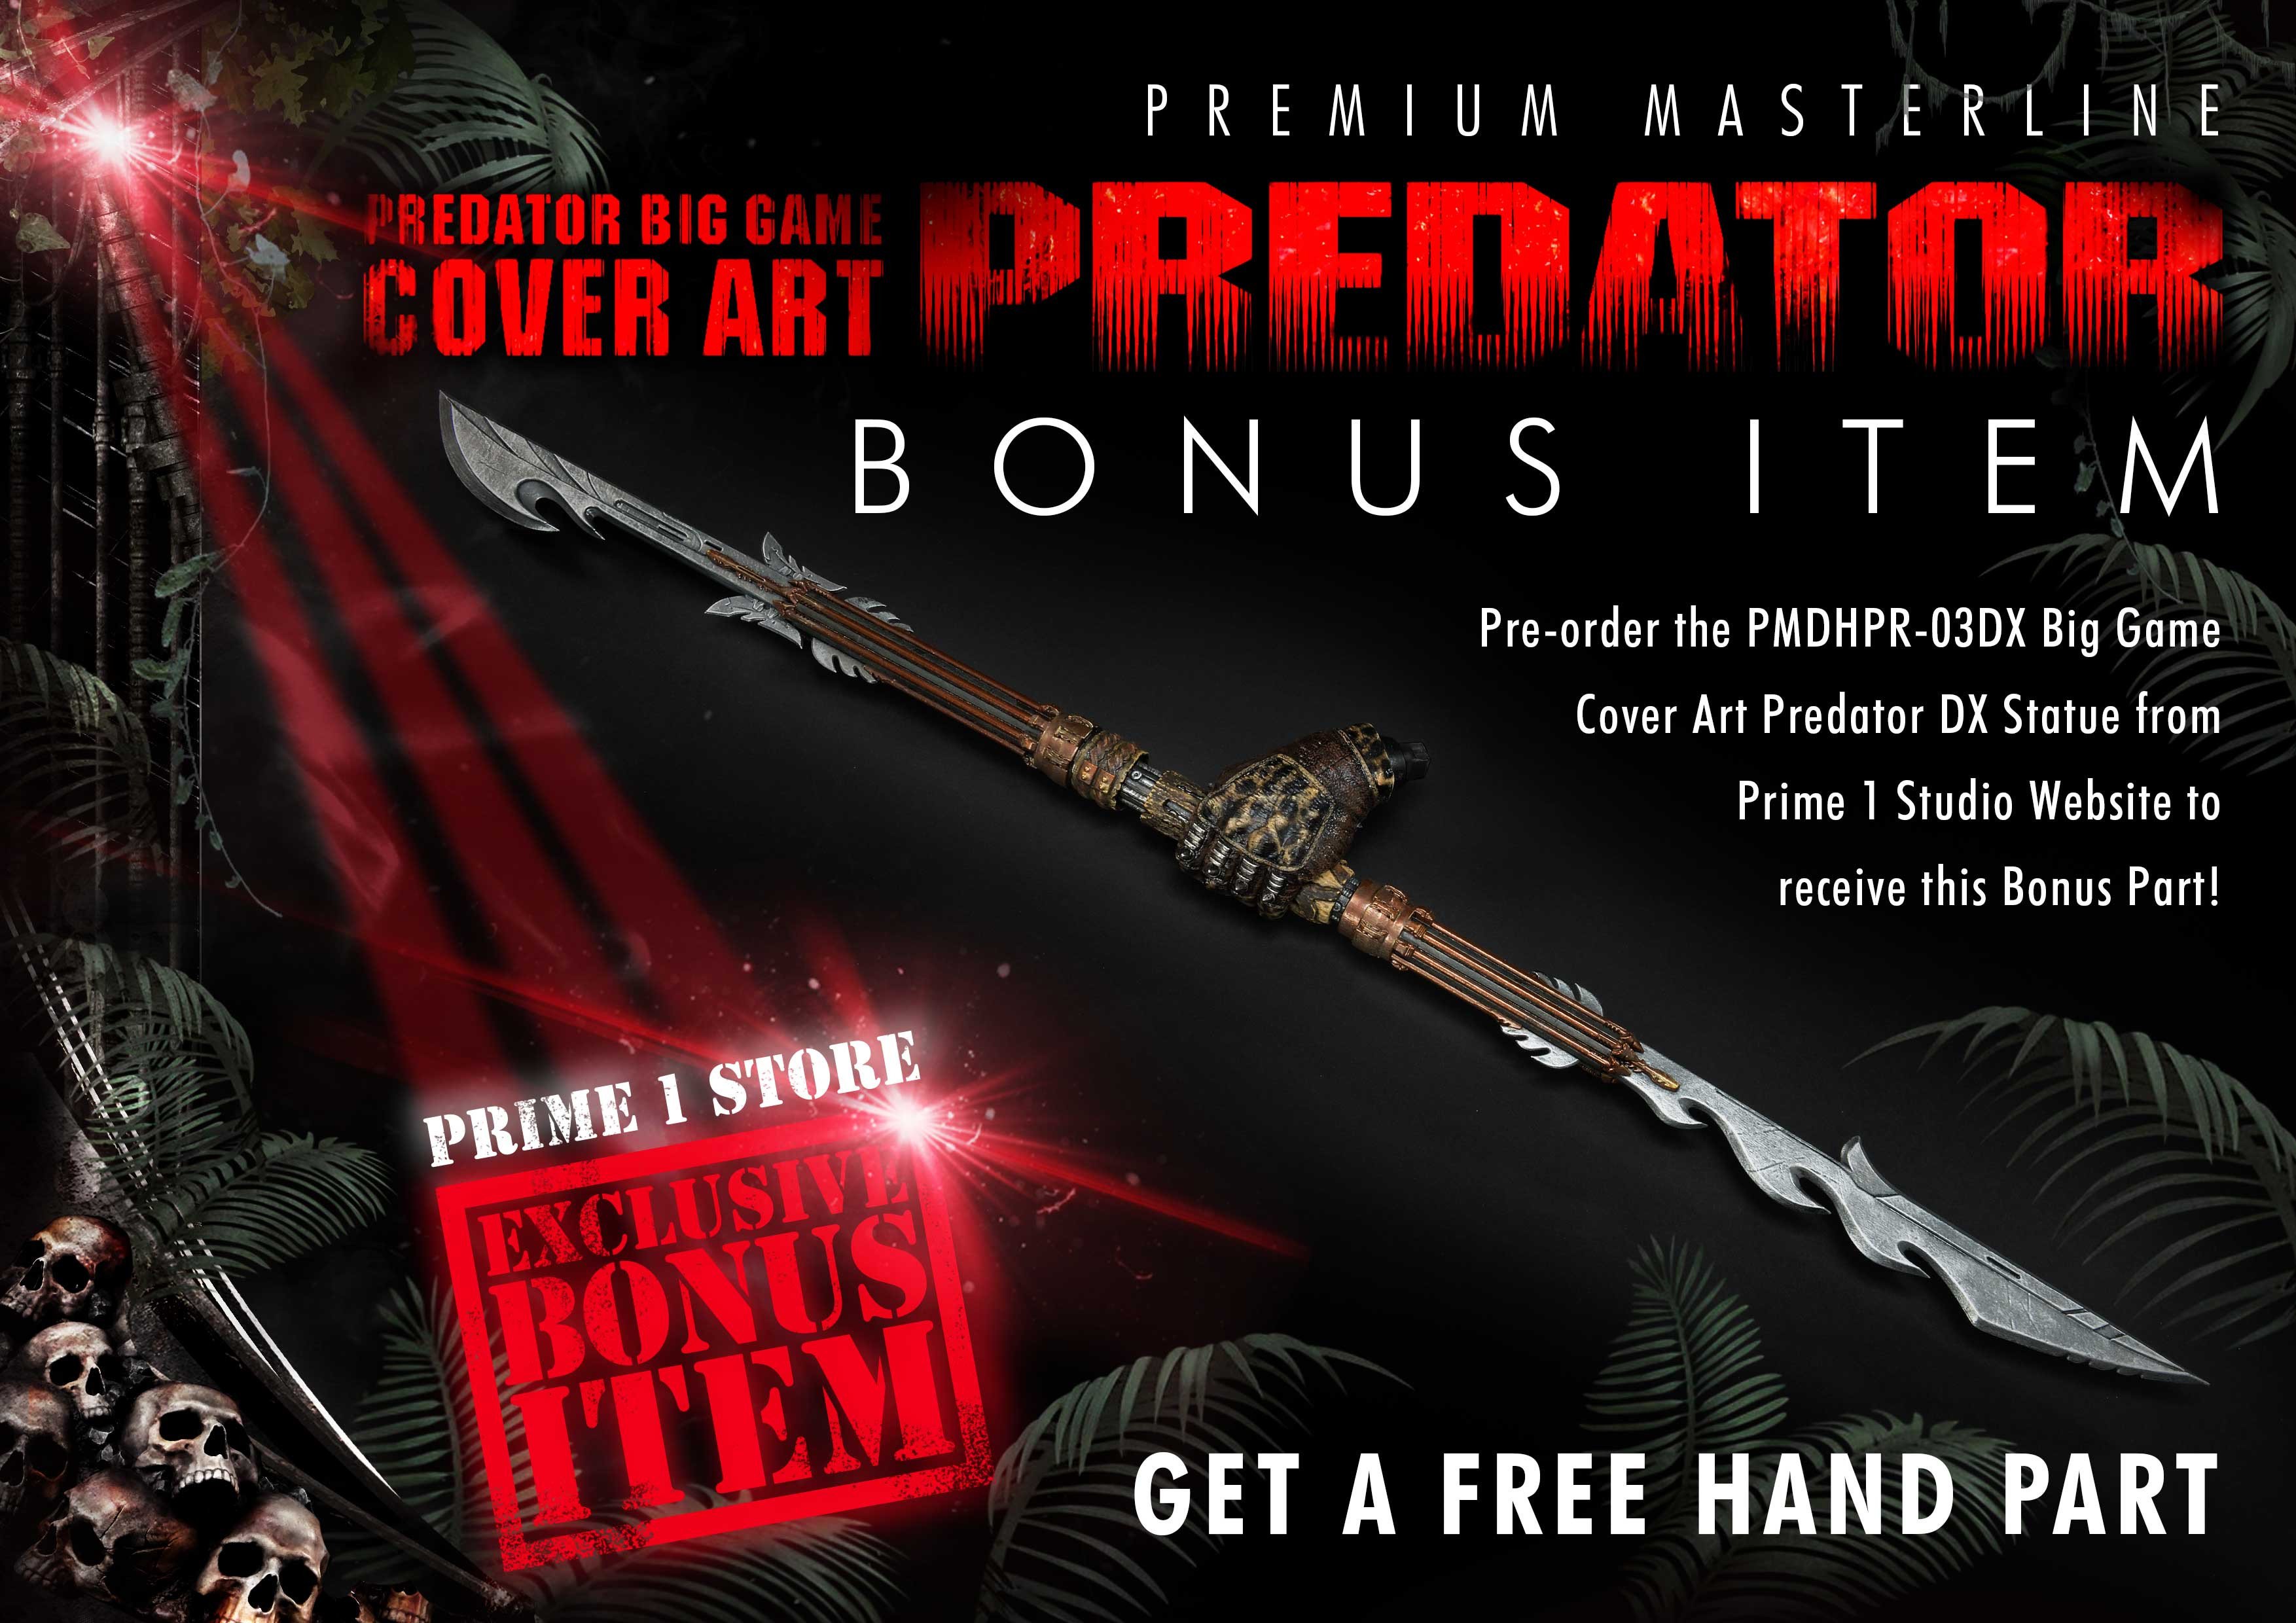 Additional left-hand holding the Combistick for PMDHPR-03DX: Big Game Cover Art Predator Deluxe Version